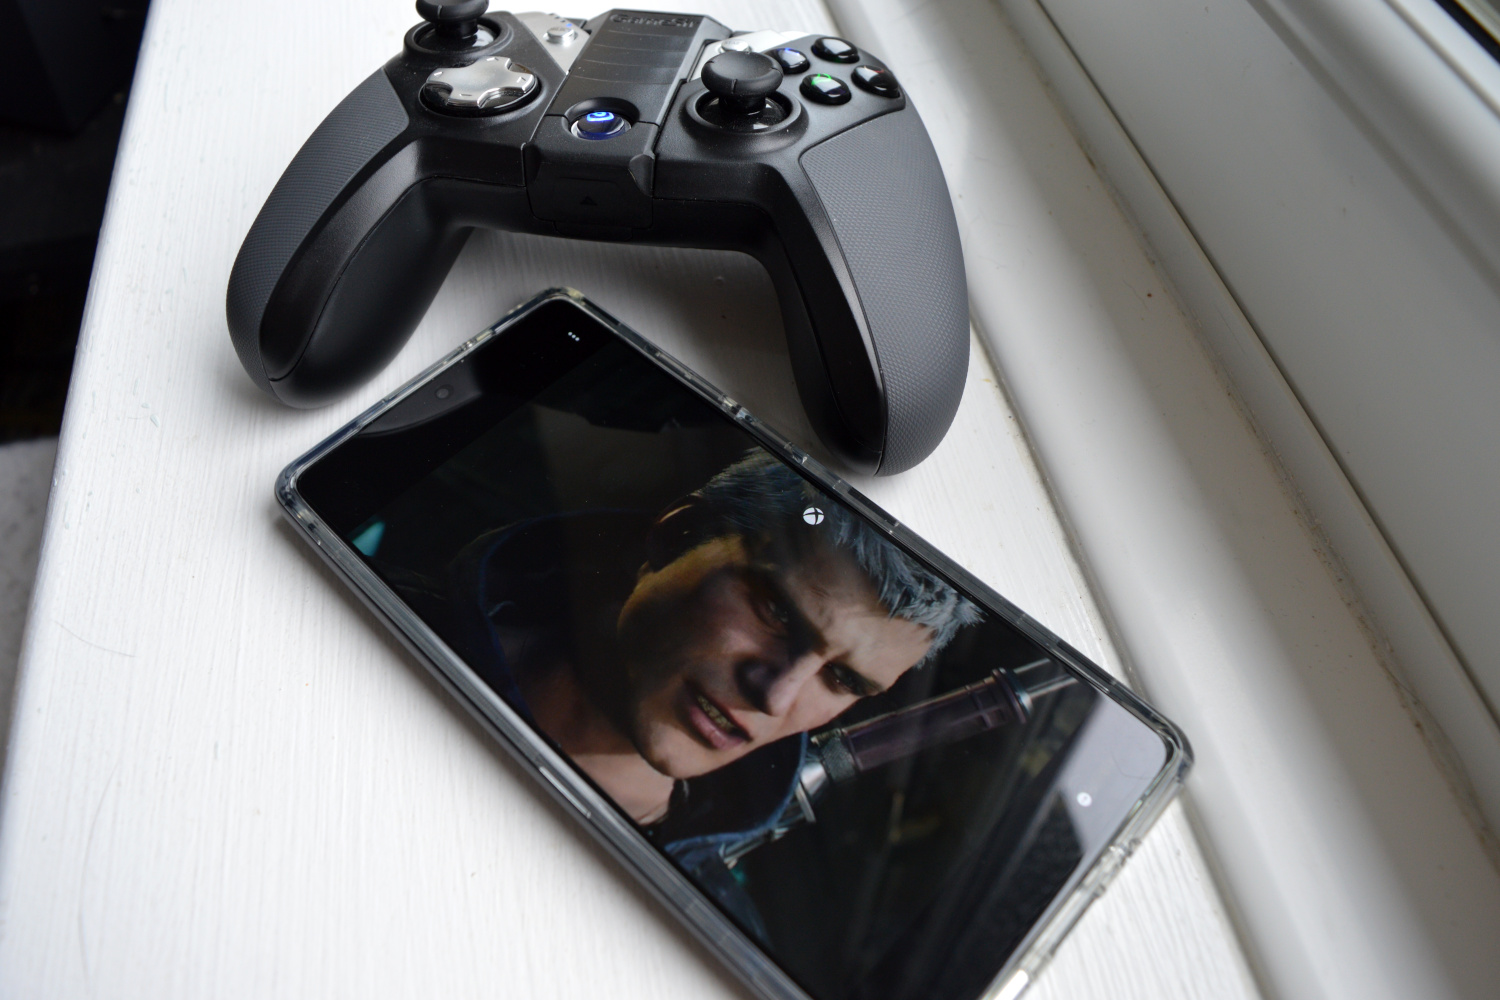 How to stream Xbox One games on your Android phone - CNET